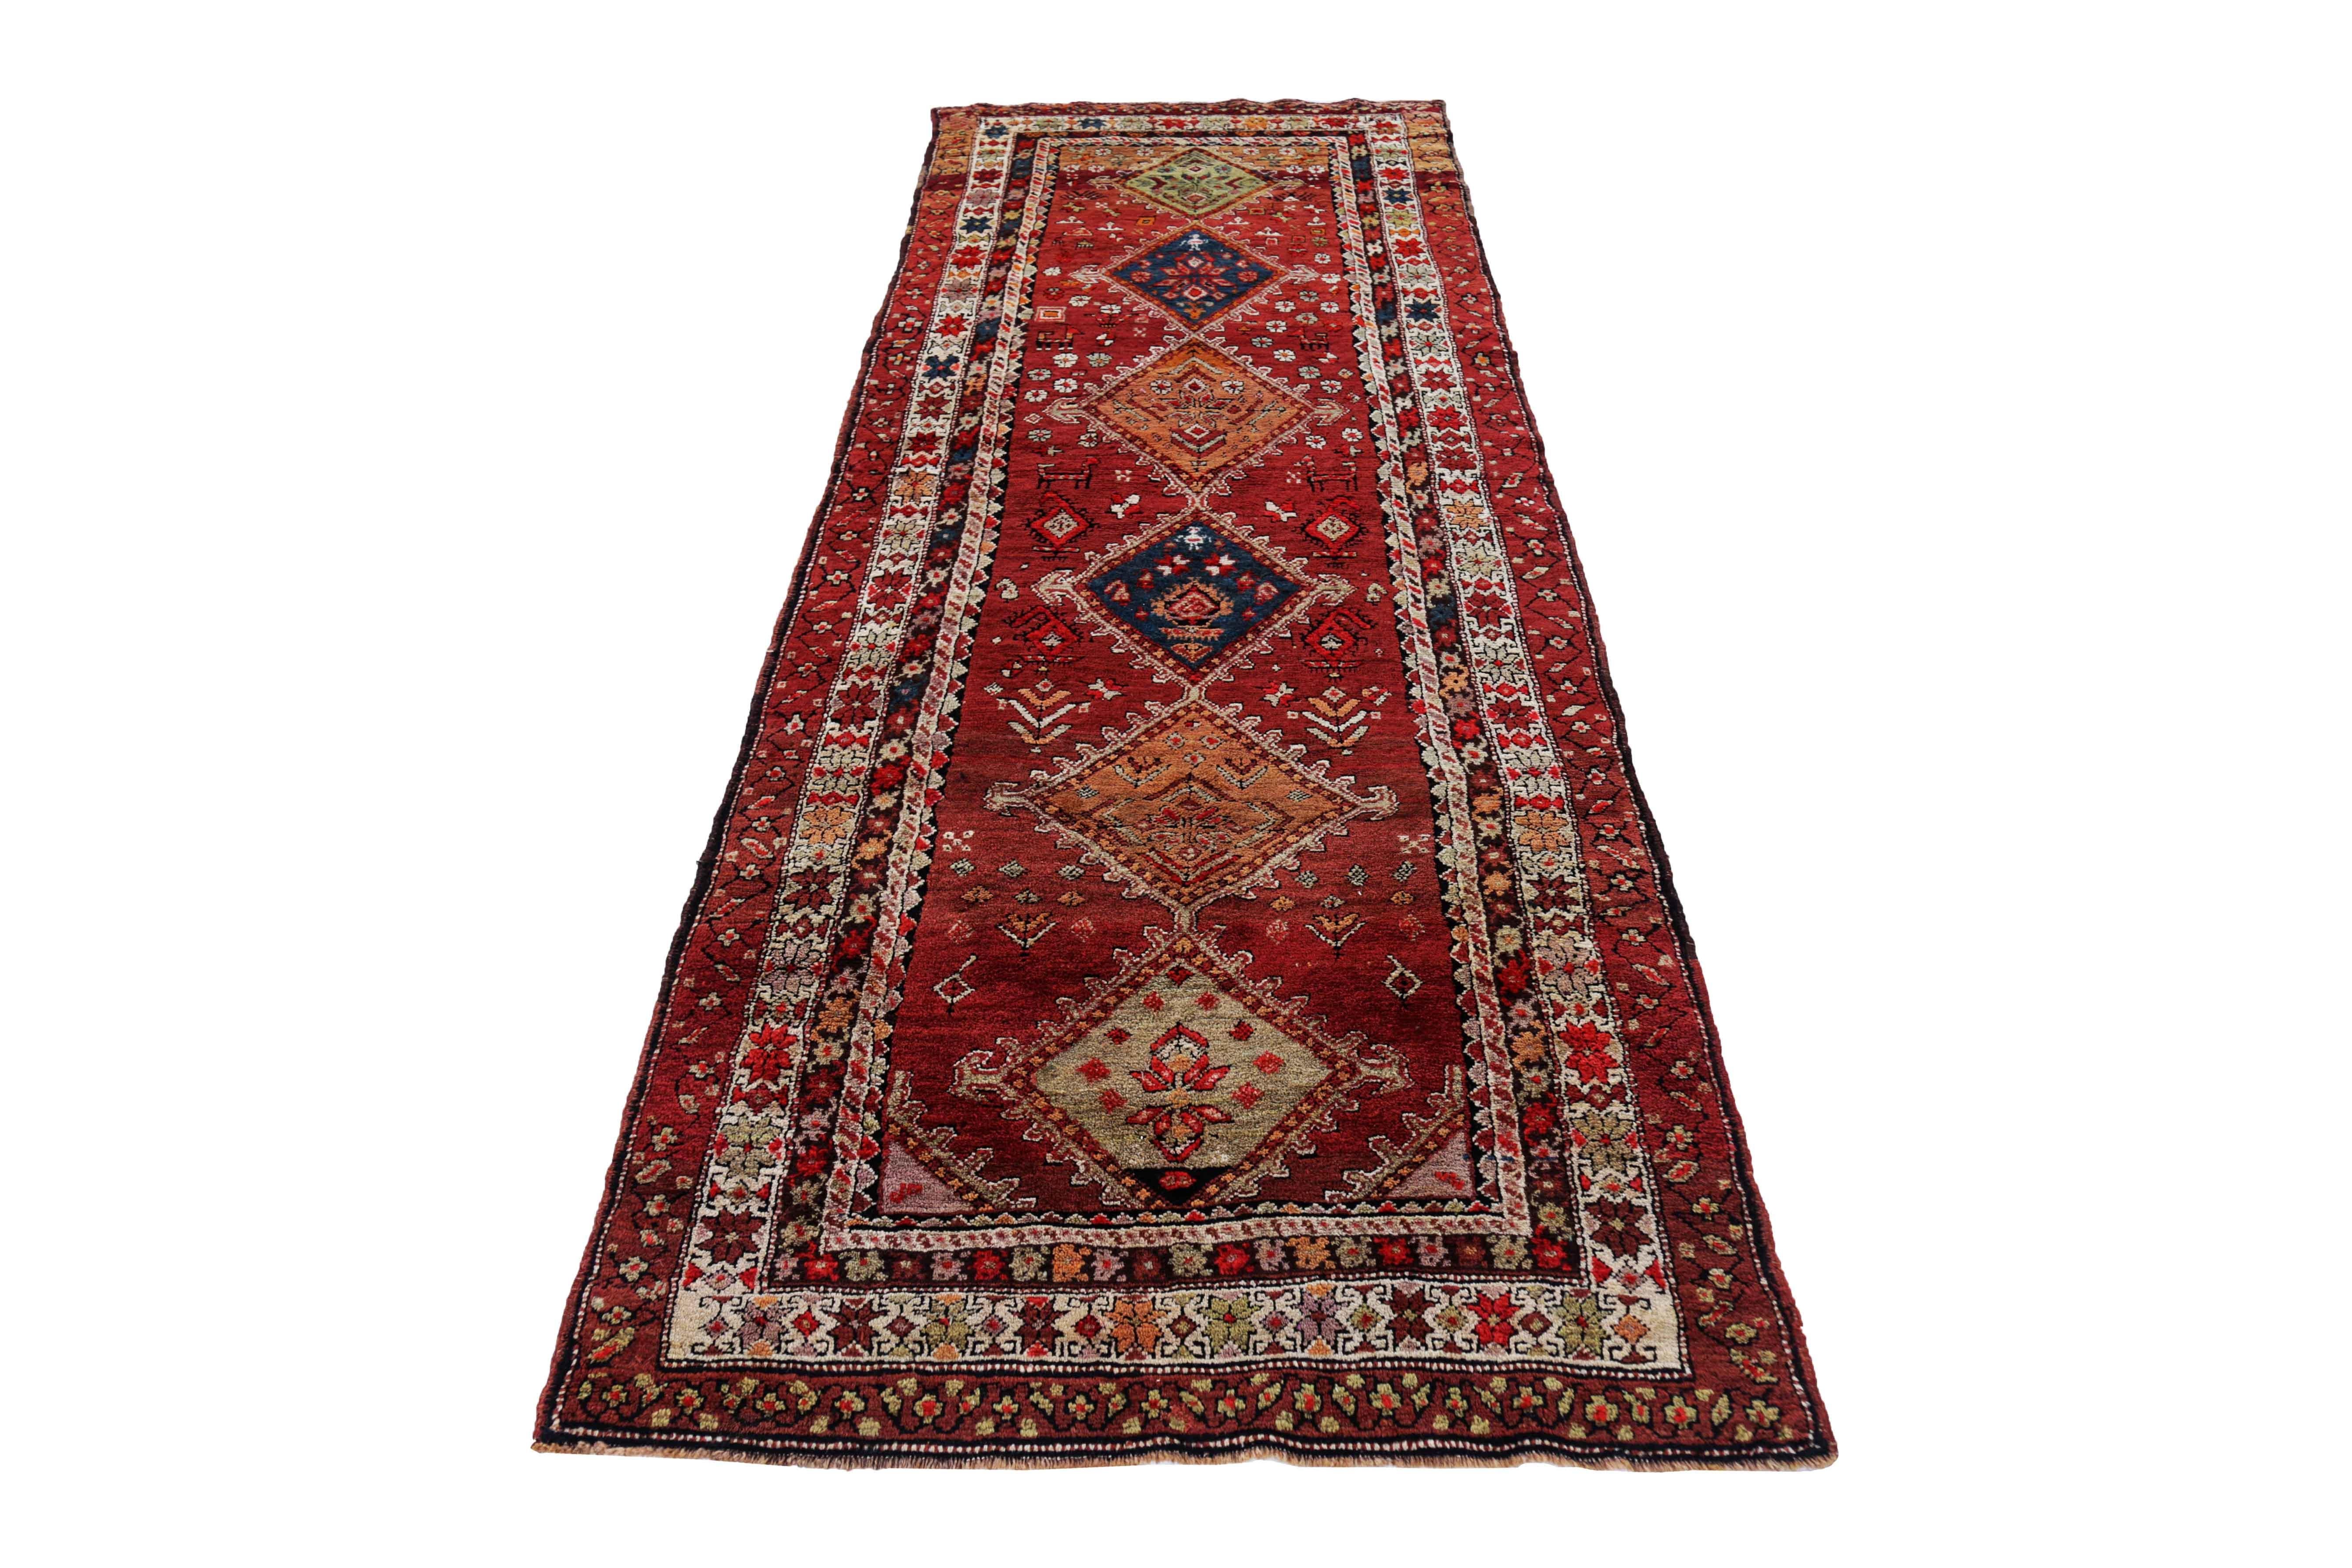 Antique Persian area rug handwoven from the finest sheep’s wool. It’s colored with all-natural vegetable dyes that are safe for humans and pets. It’s a traditional Kazak design handwoven by expert artisans. It’s a lovely area rug that can be